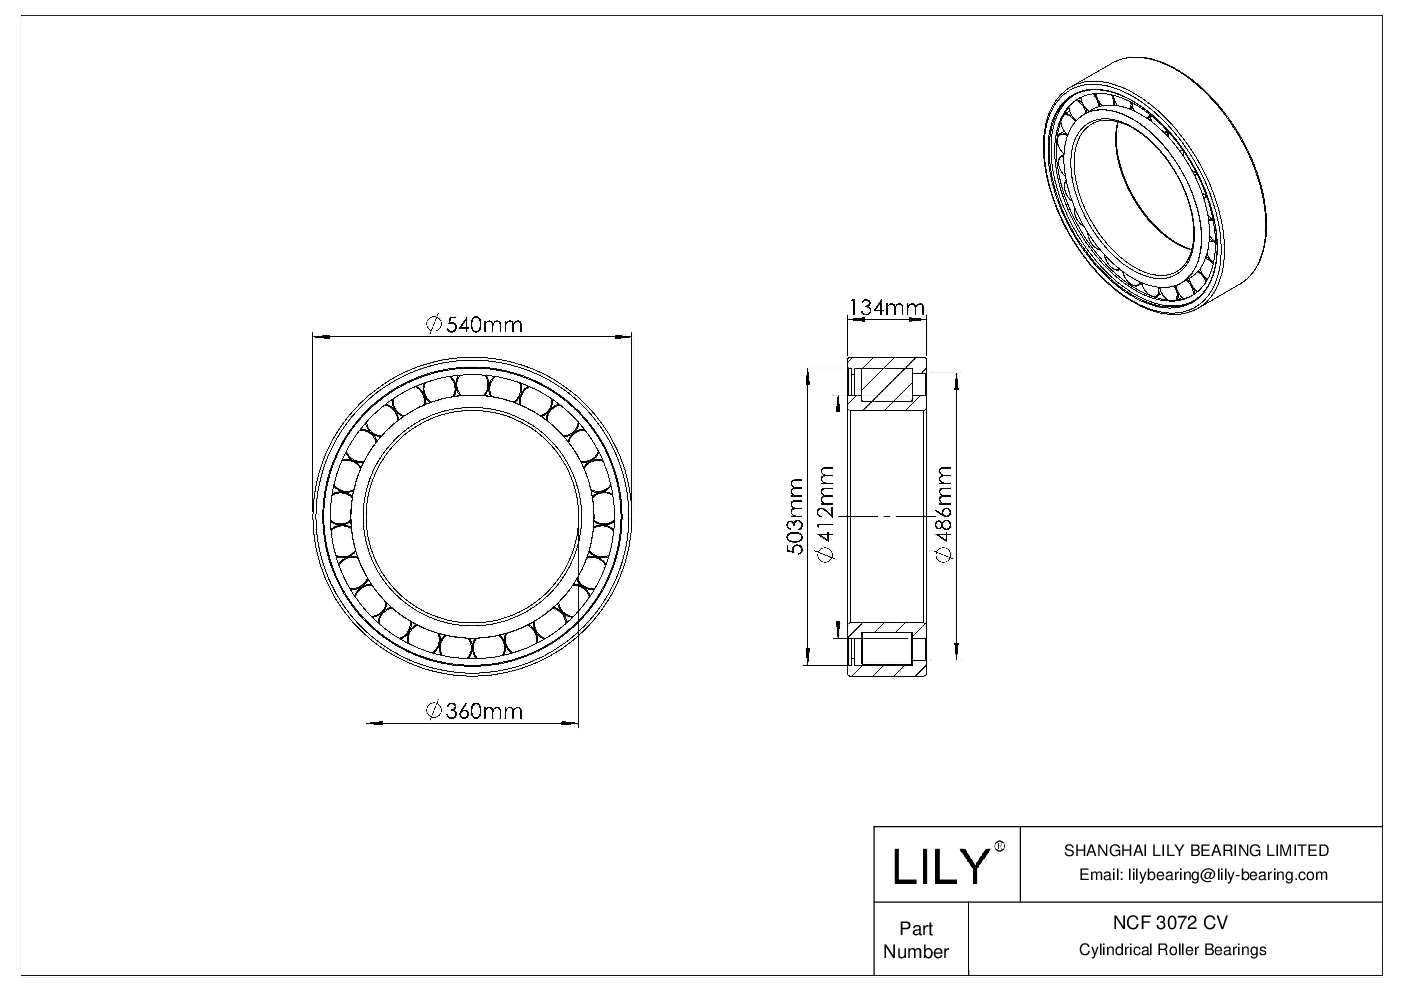 NCF 3072 CV Single Row Full Complement Cylindrical Roller Bearings cad drawing